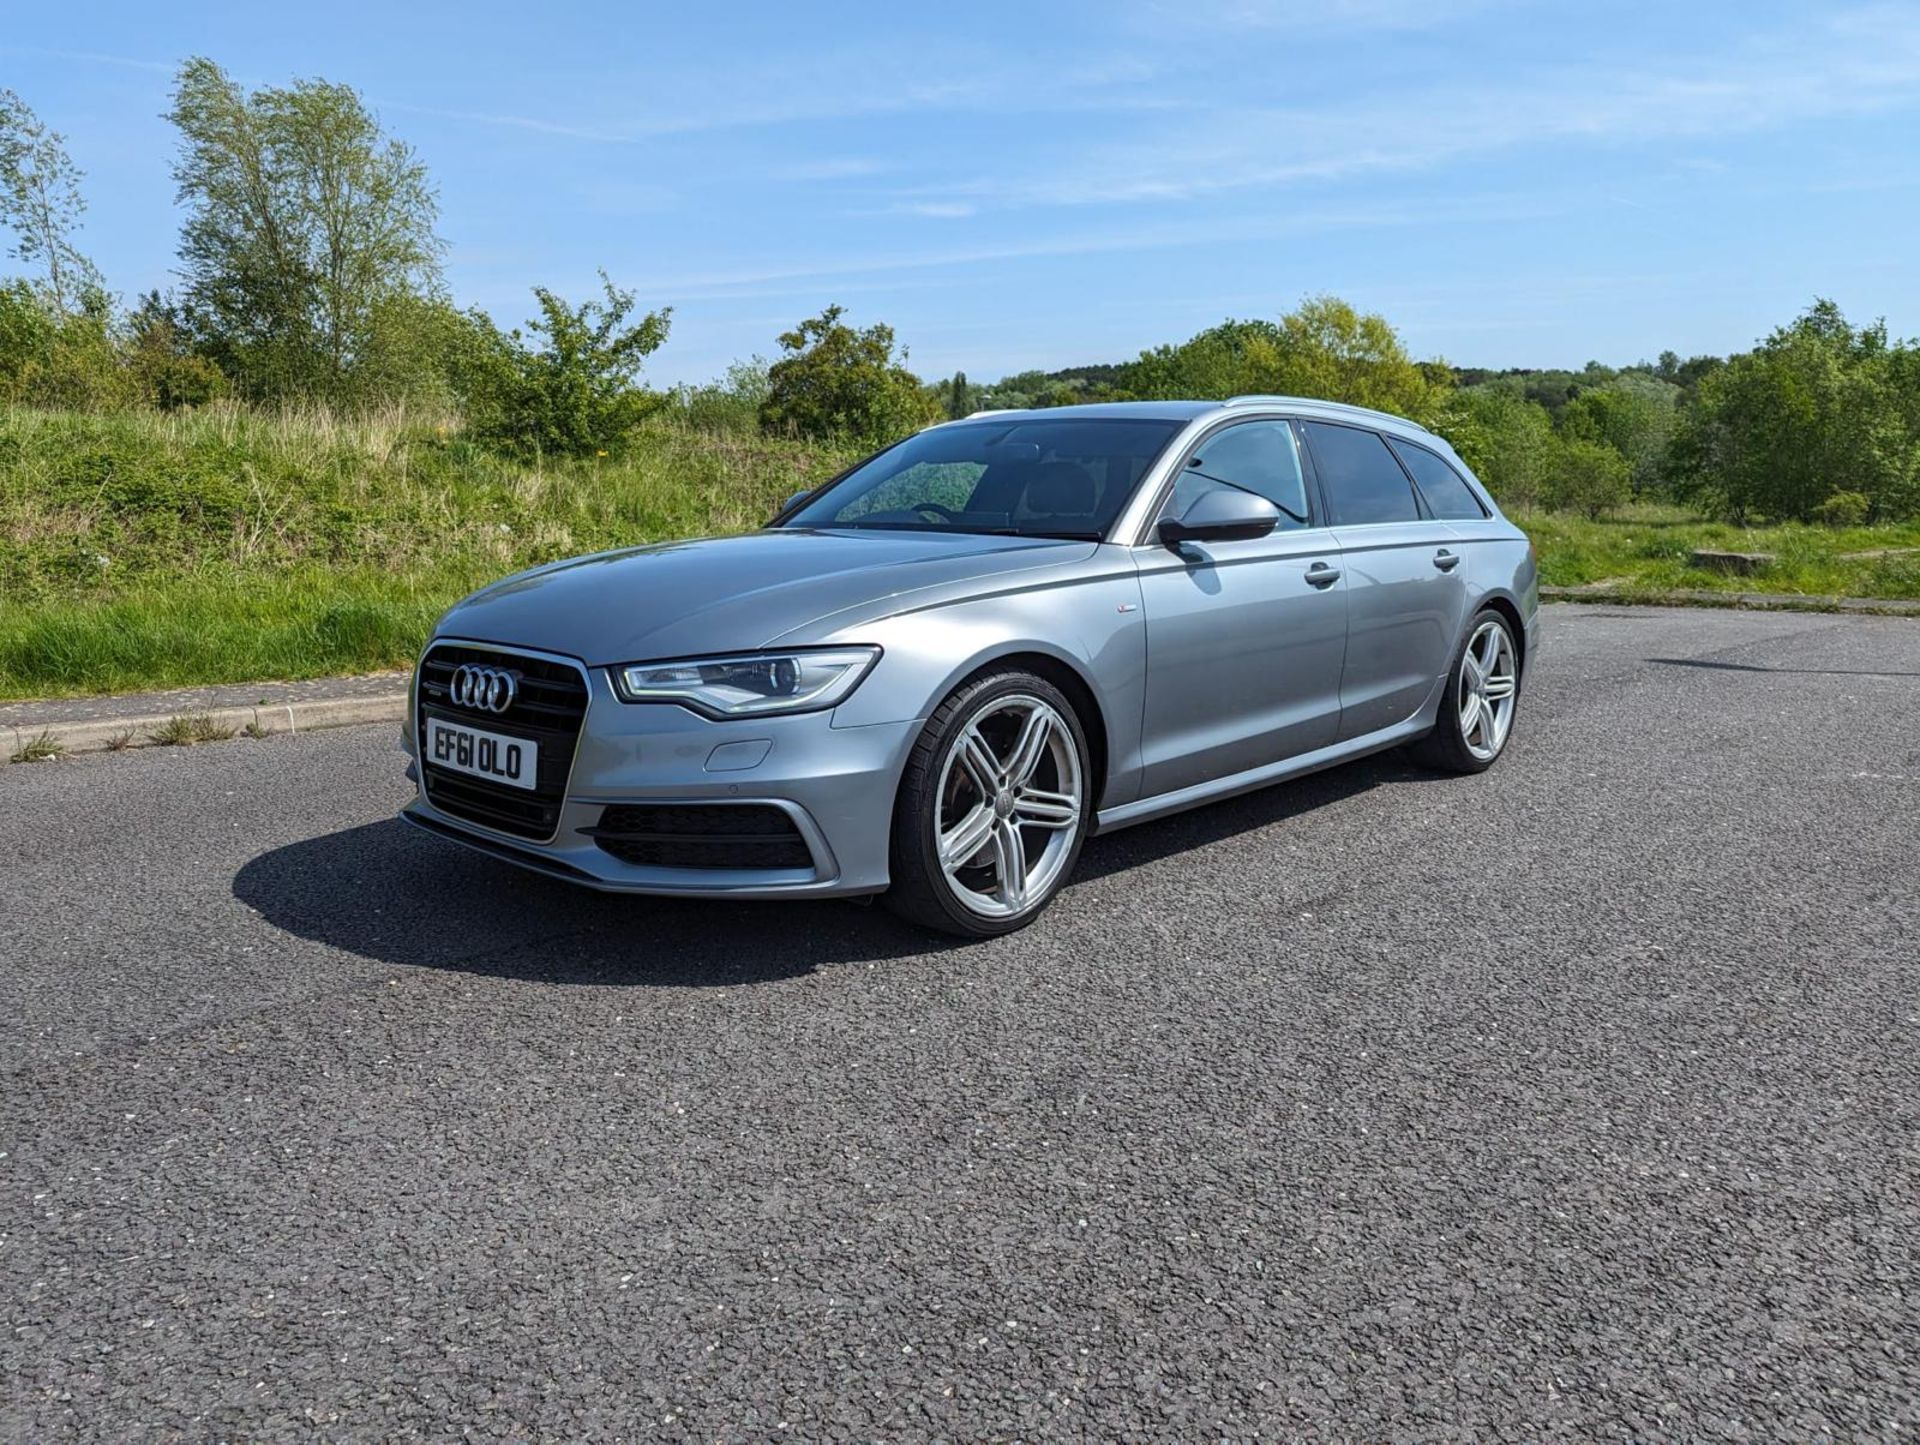 2012/61 REG AUDI A6 S LINE TDI 3.0 DIESEL QUATTRO AUTOMATIC GREY ESTATE, SHOWING 3 FORMER KEEPERS - Image 4 of 49